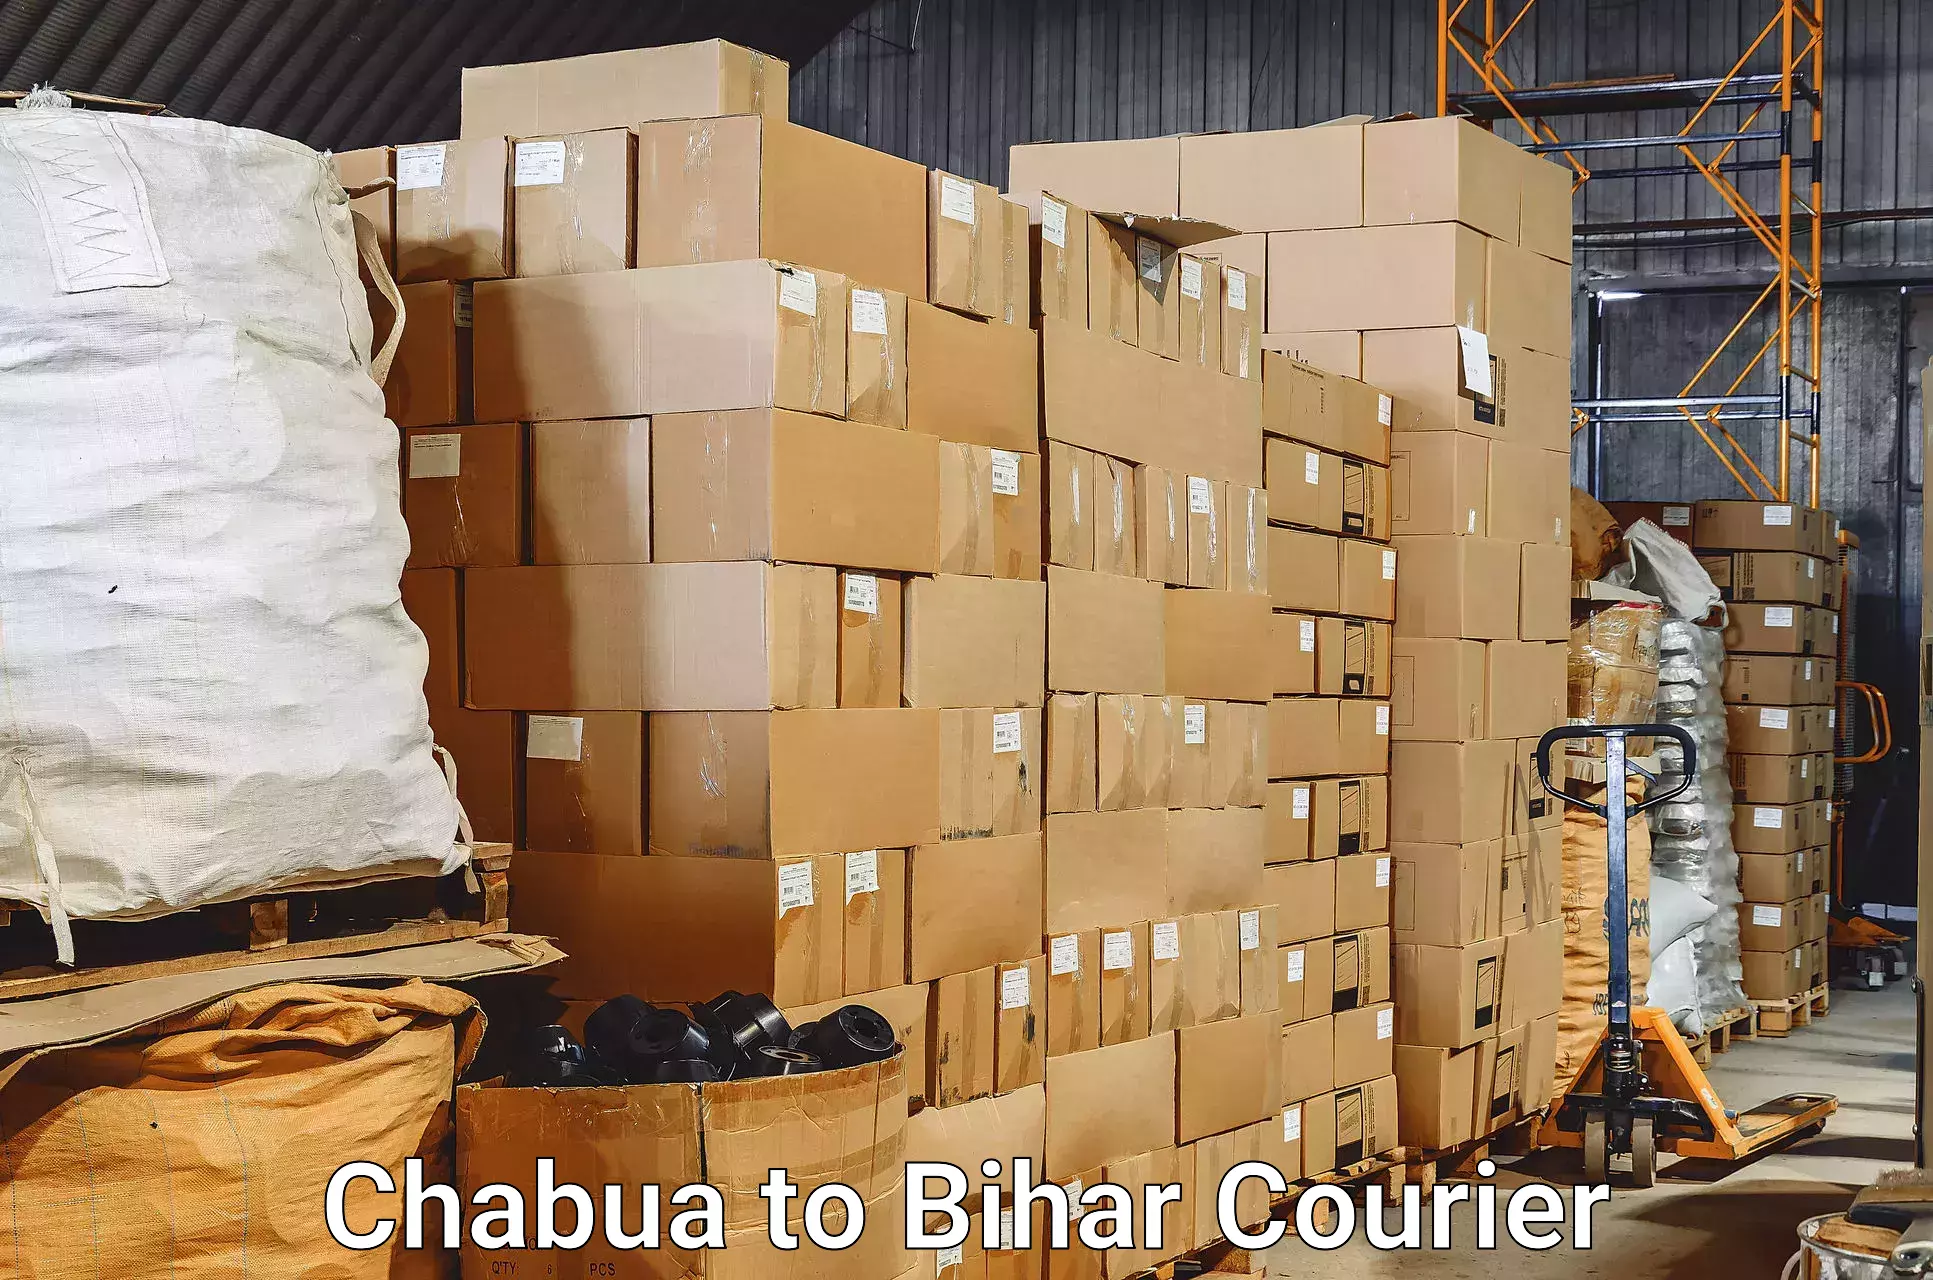 Instant baggage transport quote Chabua to Bhojpur